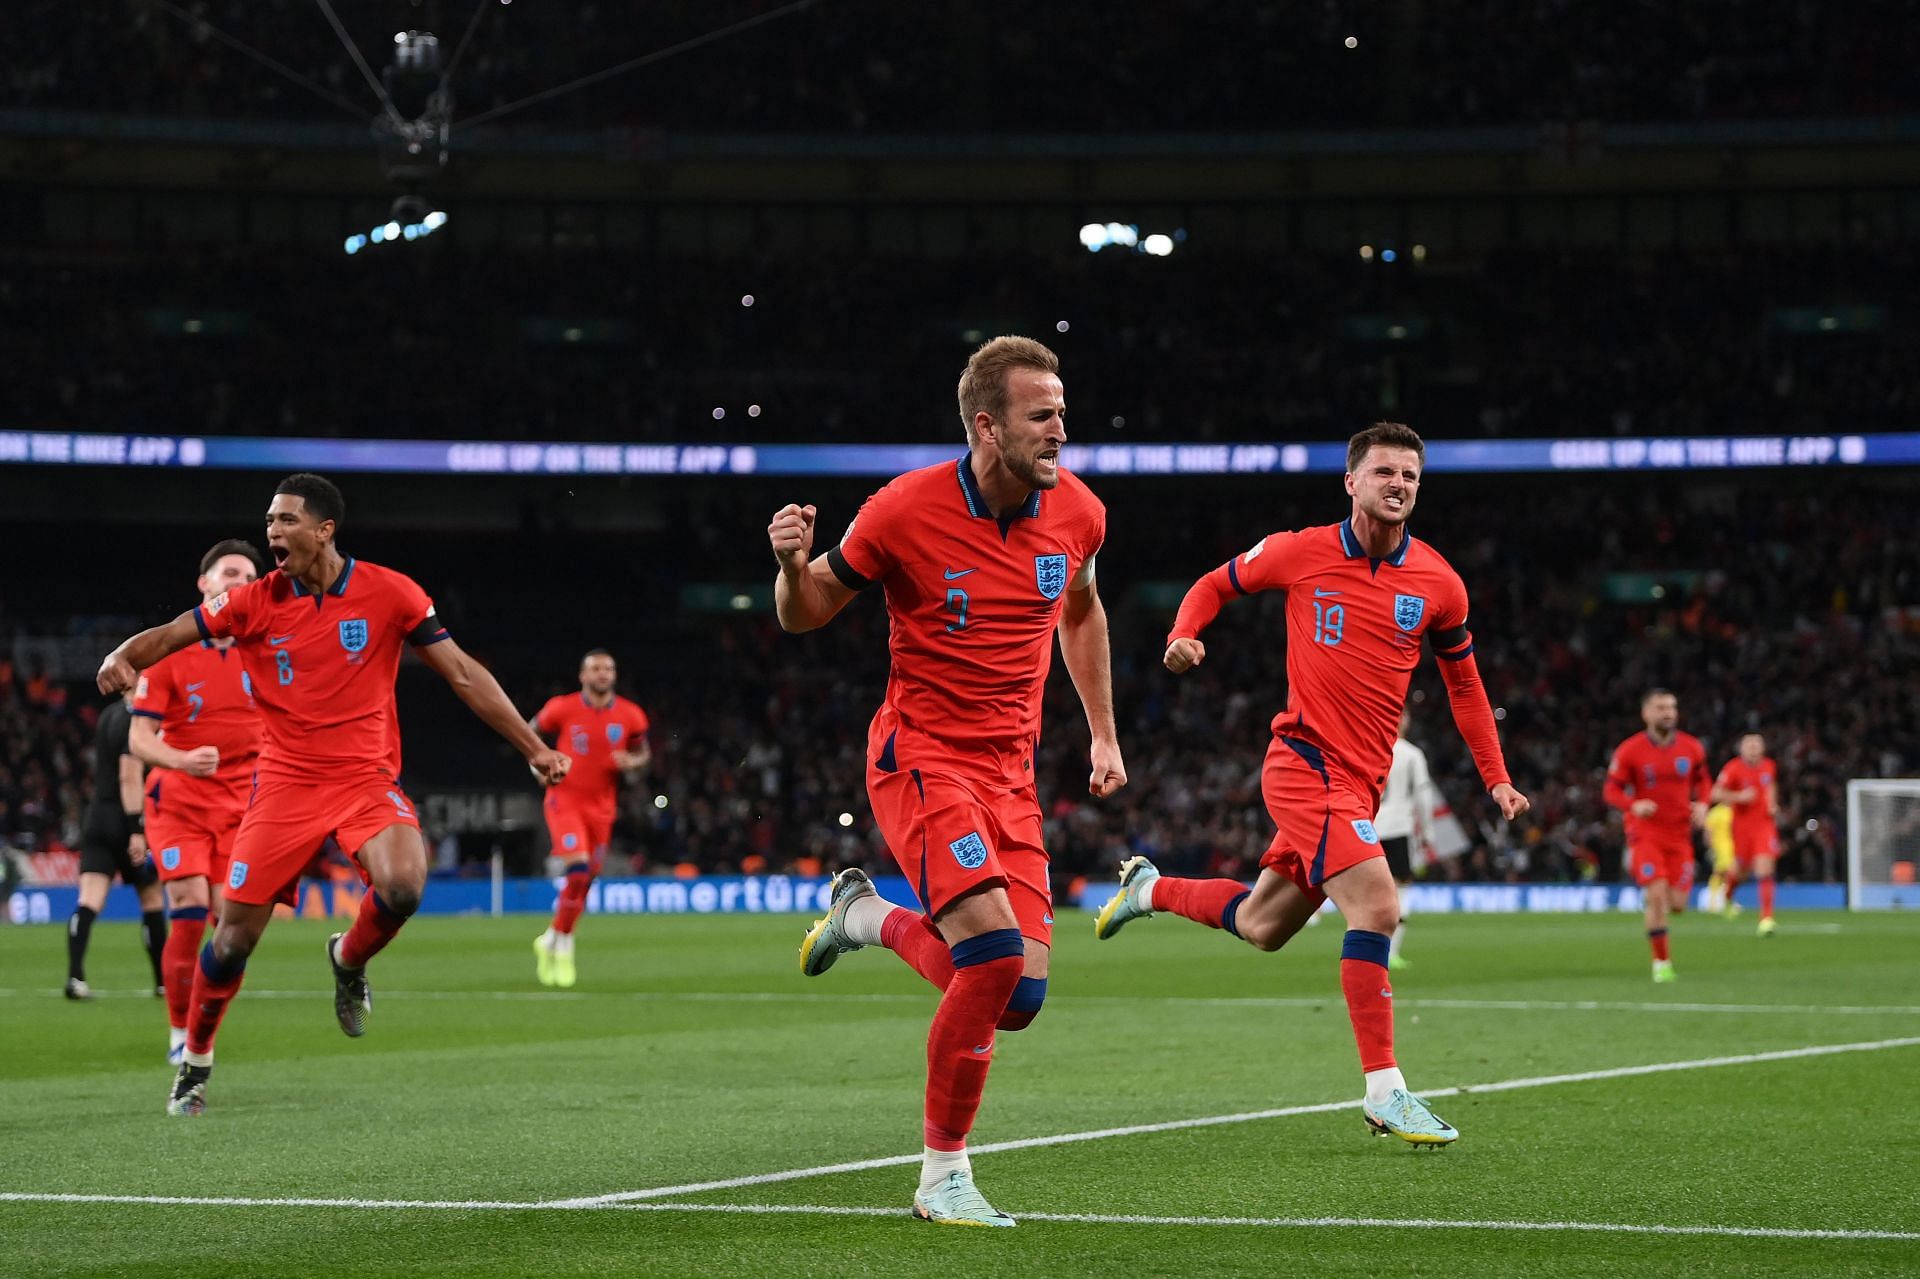 A rollercoaster ride for the Three Lions against Germany